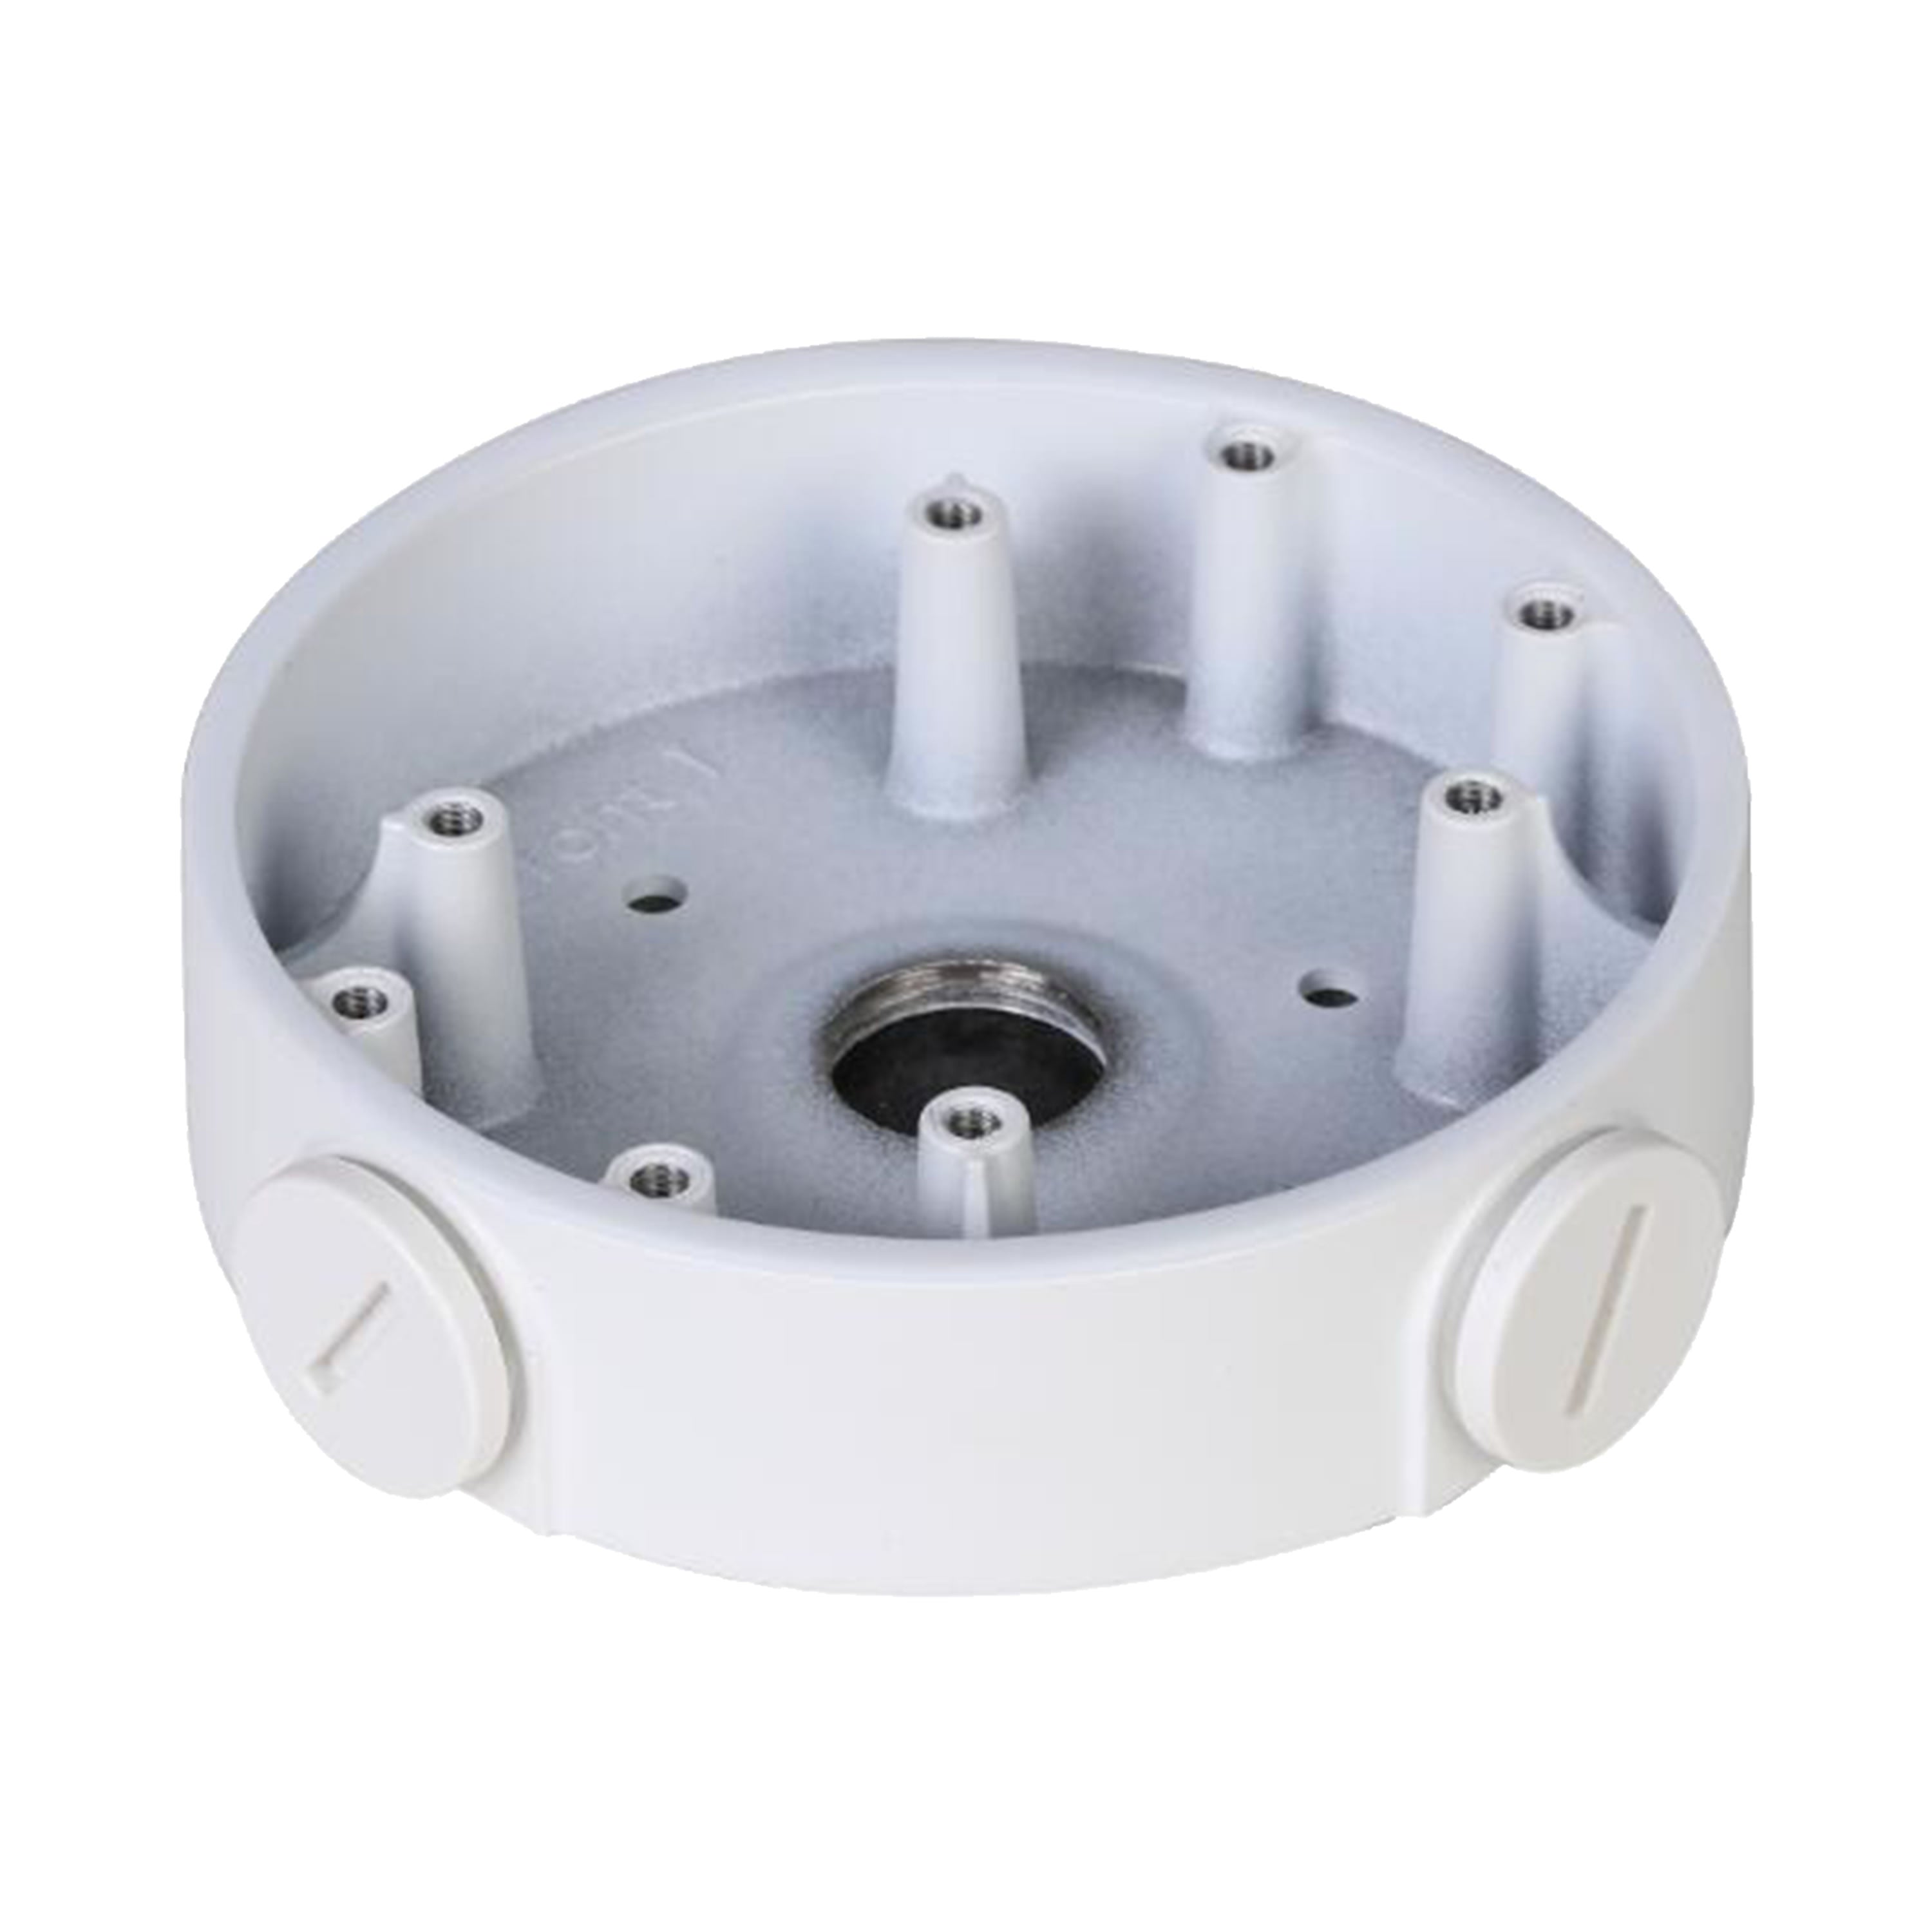 23-4FA139 Water-proof Junction Box for Turret Camera